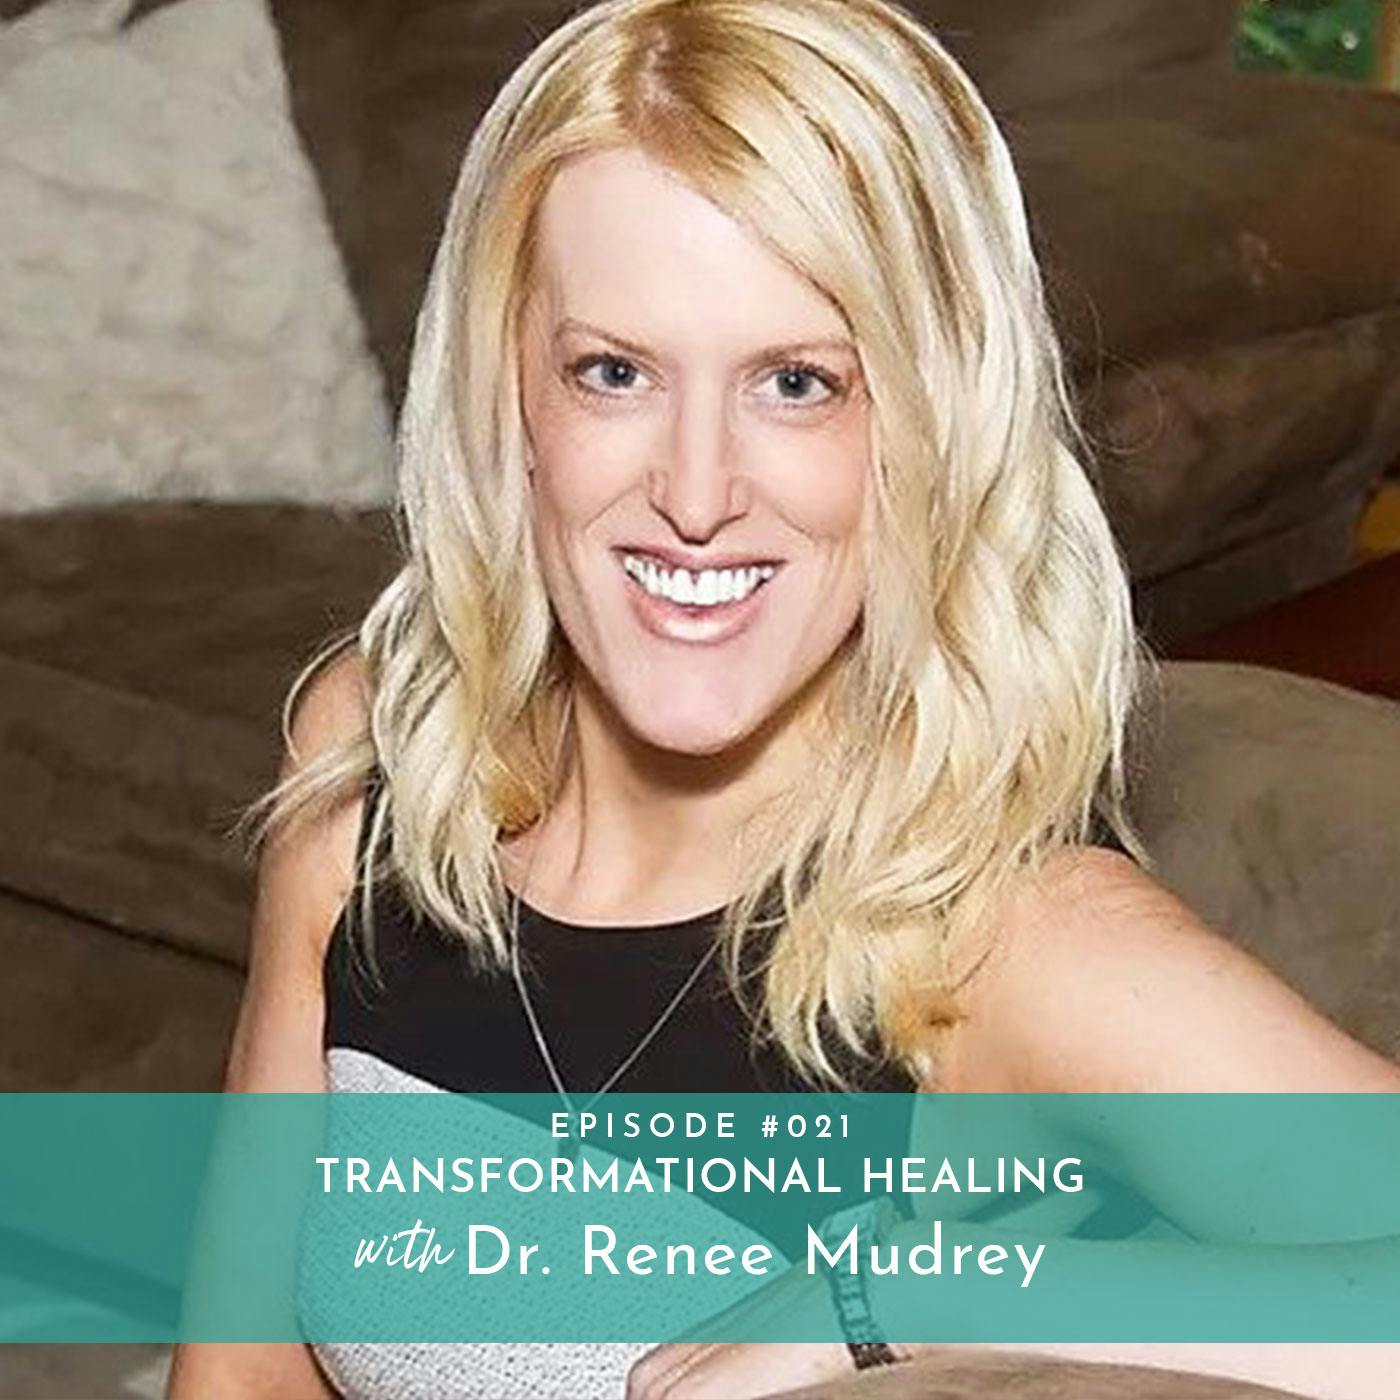 Transformational Healing with Dr. Renee Mudrey